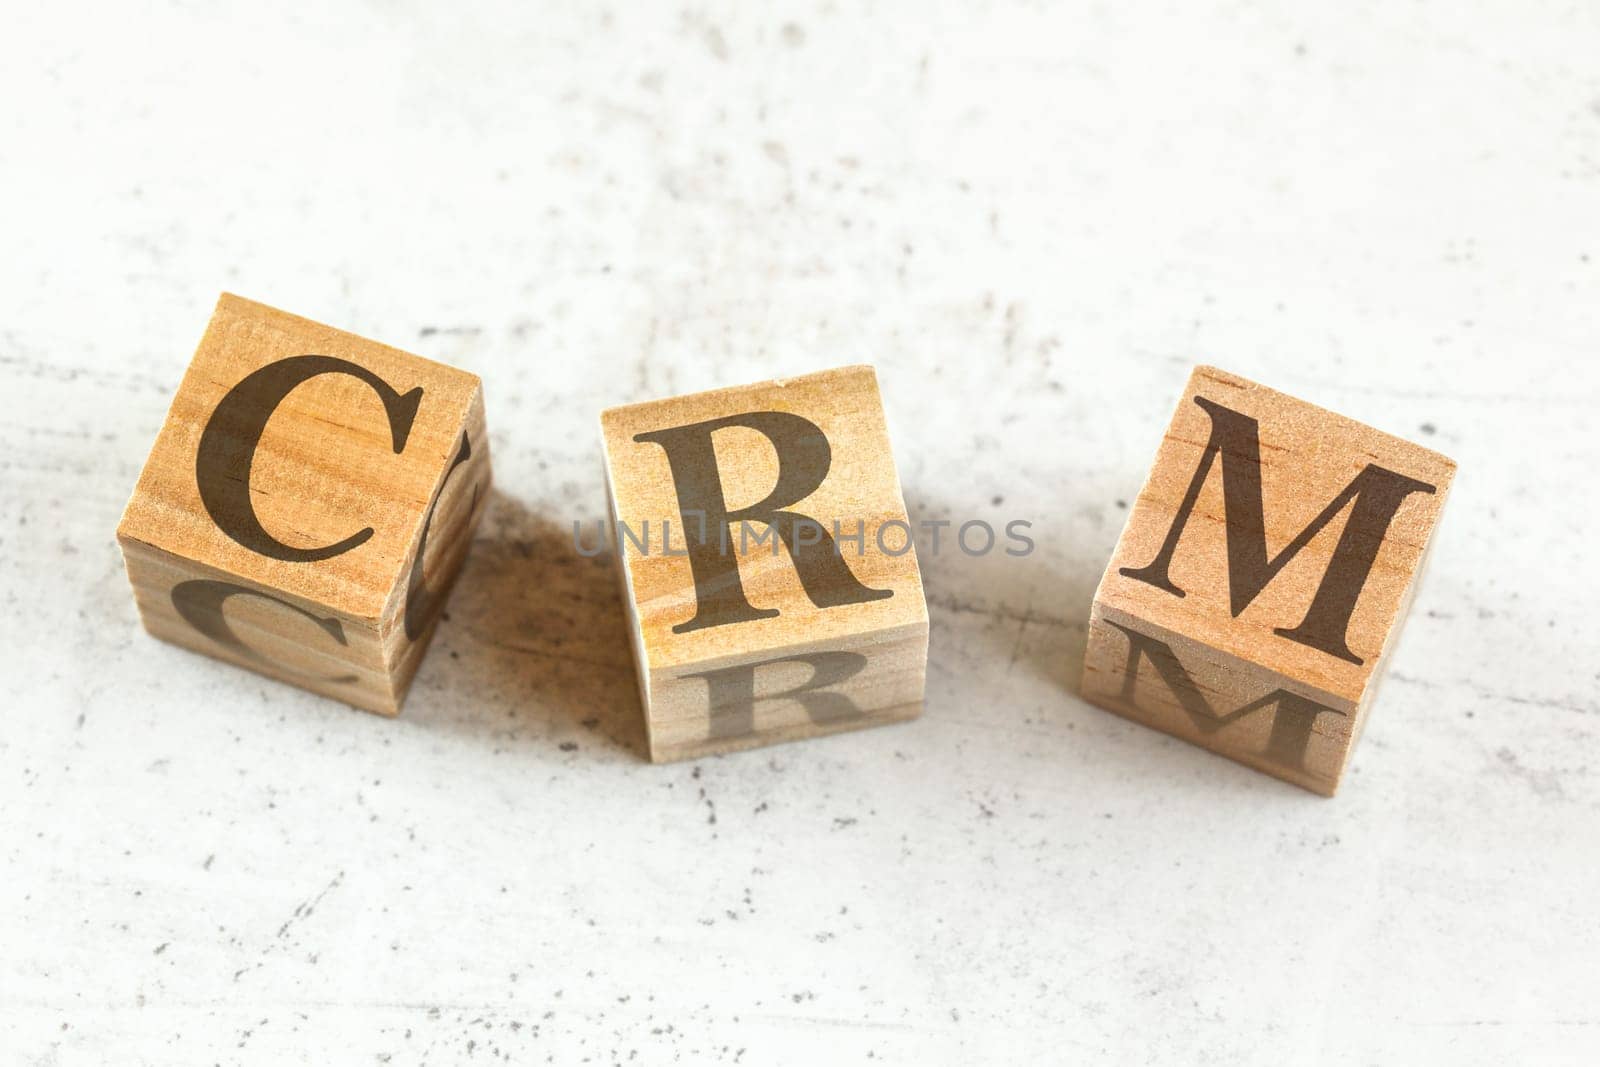 Three wooden cubes with letters CRM - stands for Customer relationship management - on white board.